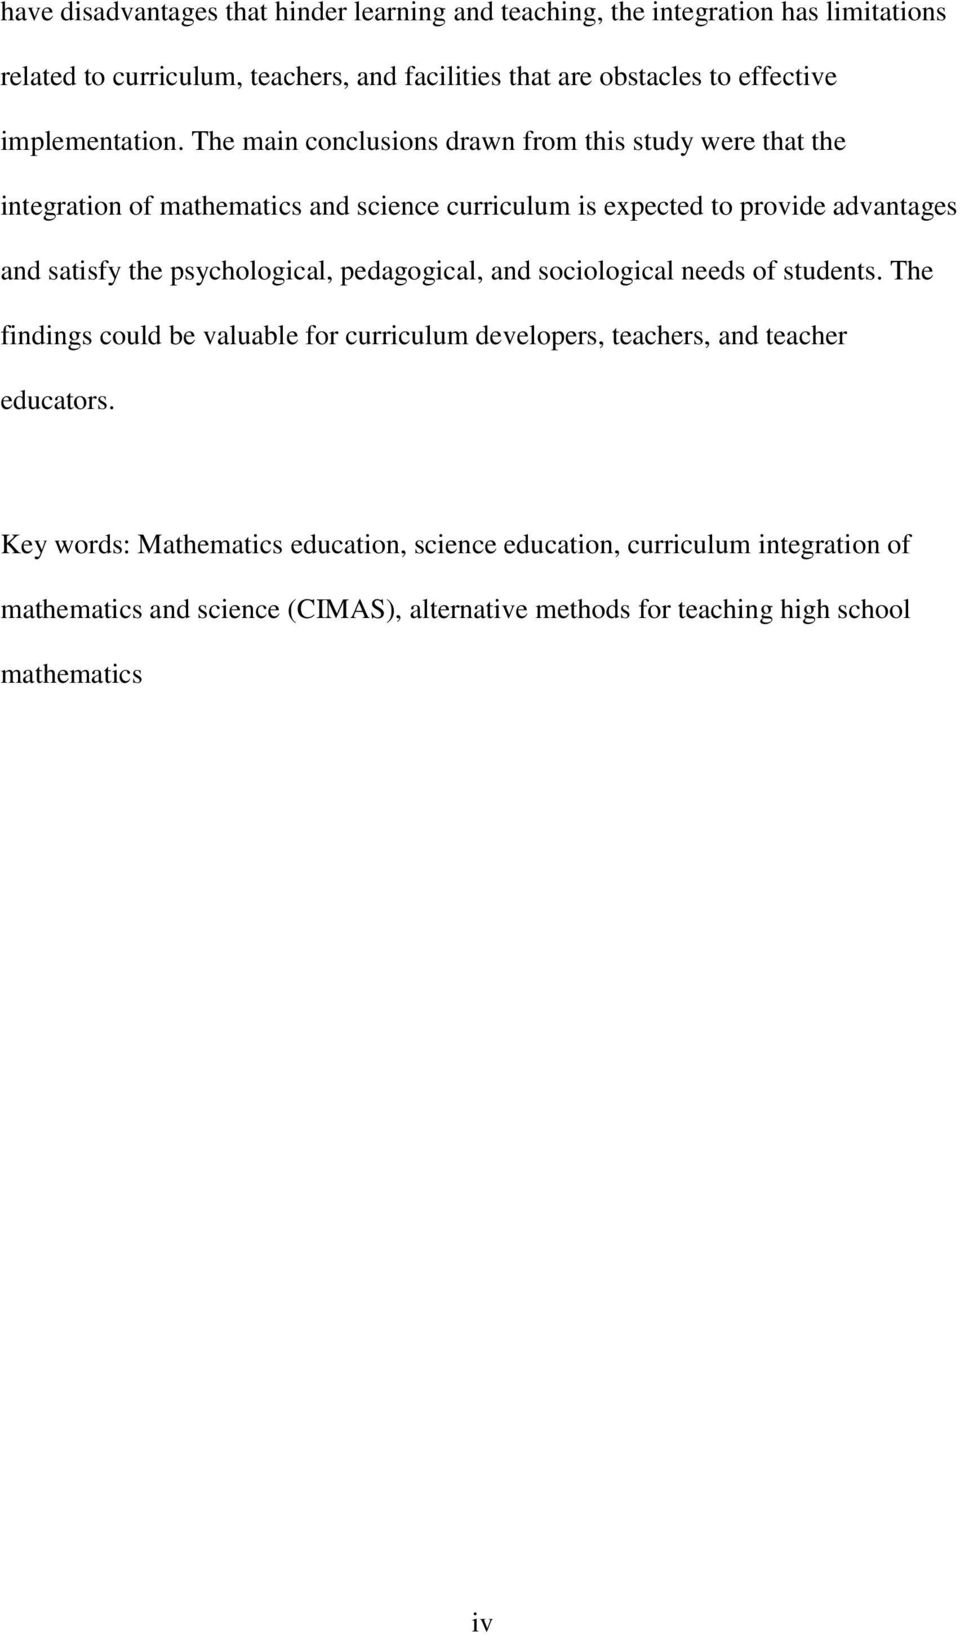 The main conclusions drawn from this study were that the integration of mathematics and science curriculum is expected to provide advantages and satisfy the